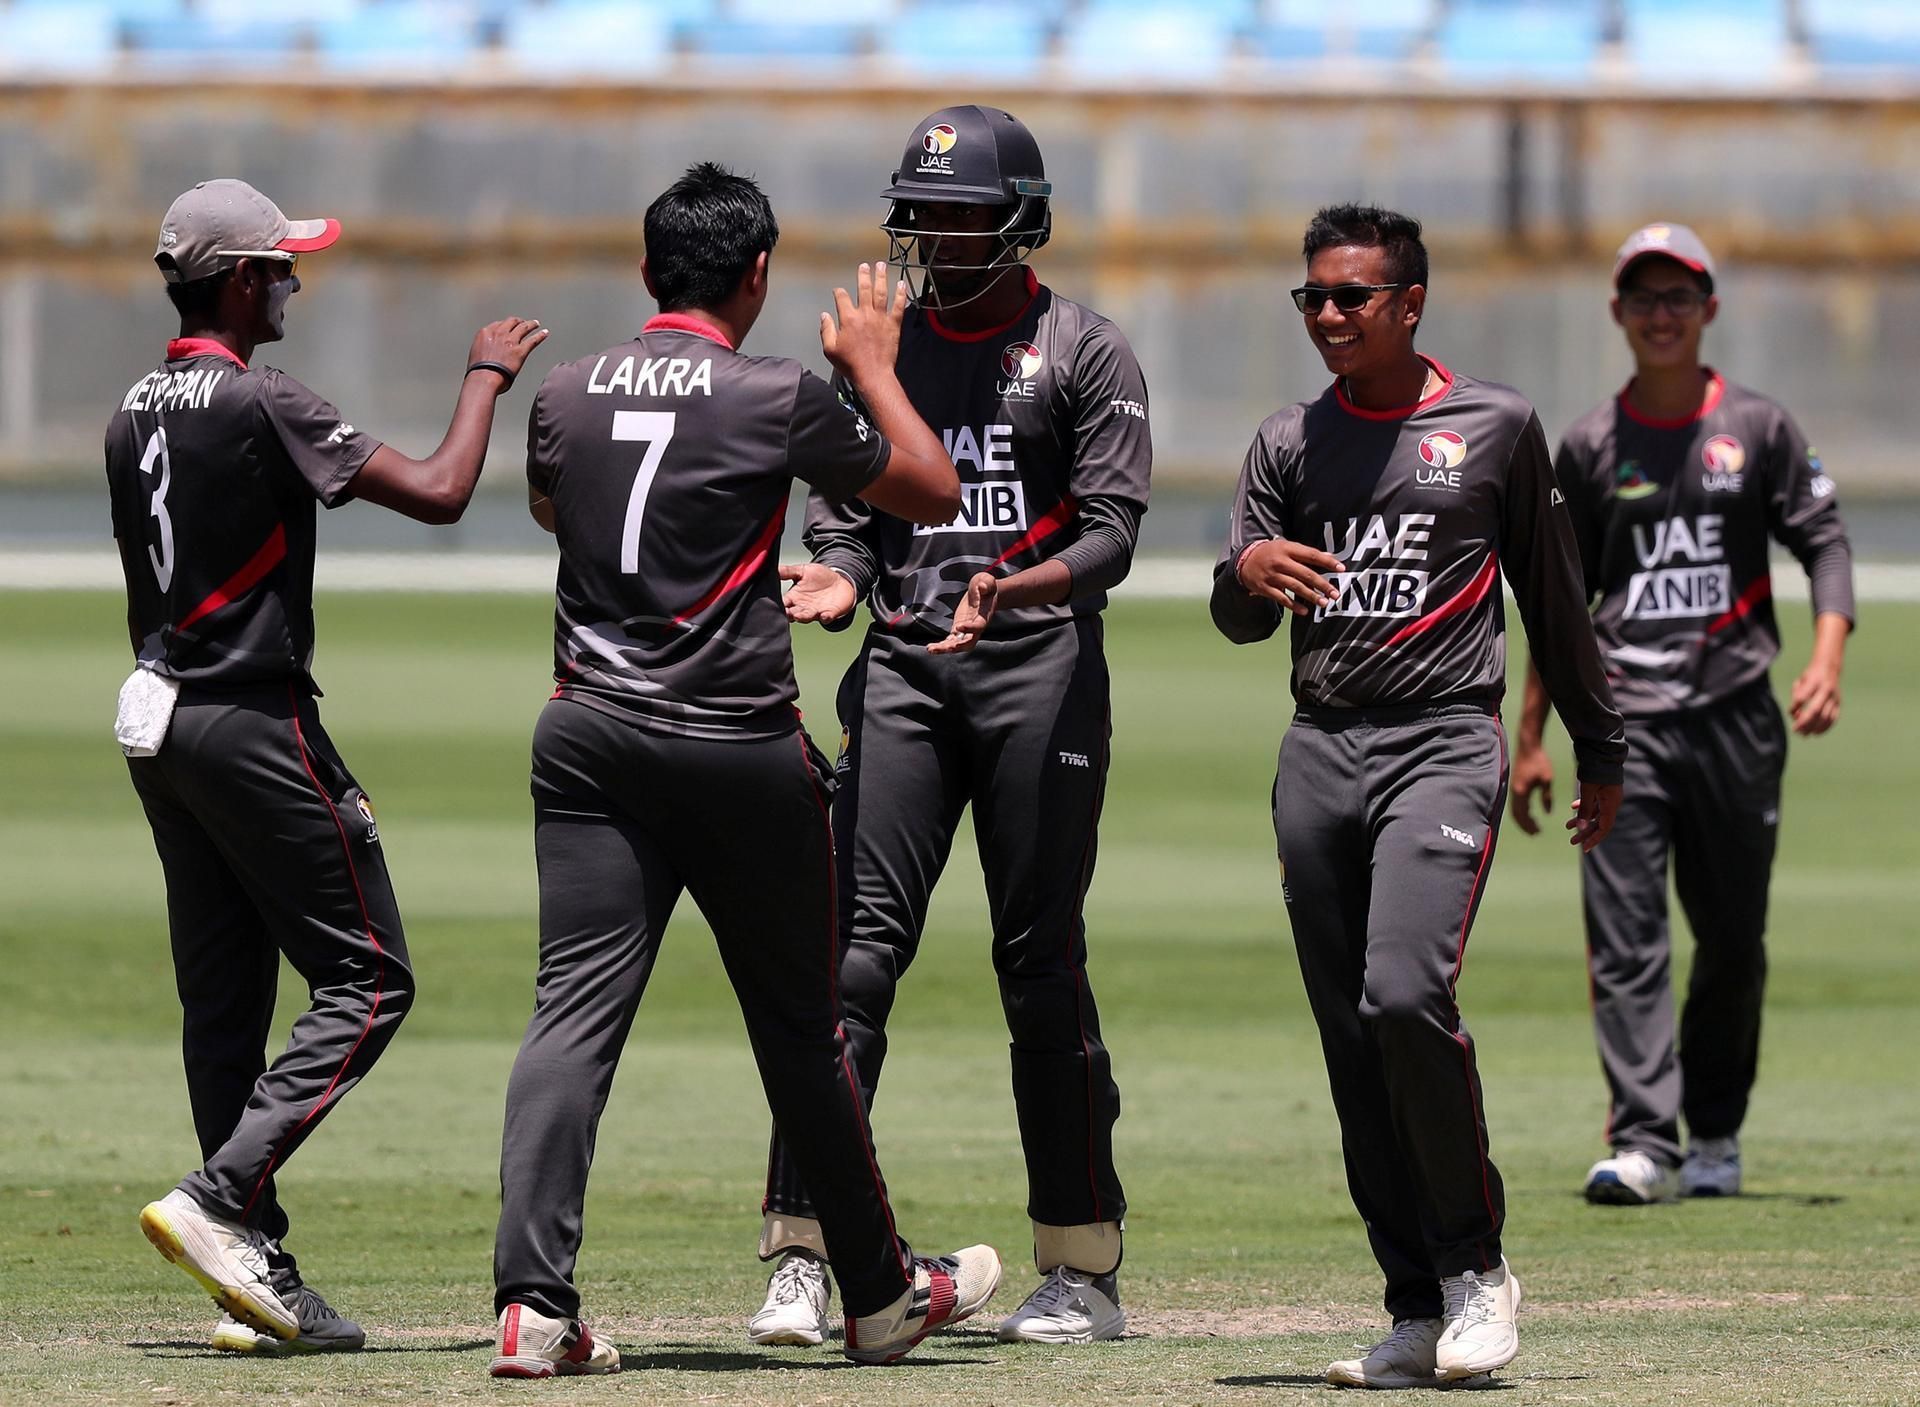 The UAE U19 cricket team in action (Image Courtesy: The National)